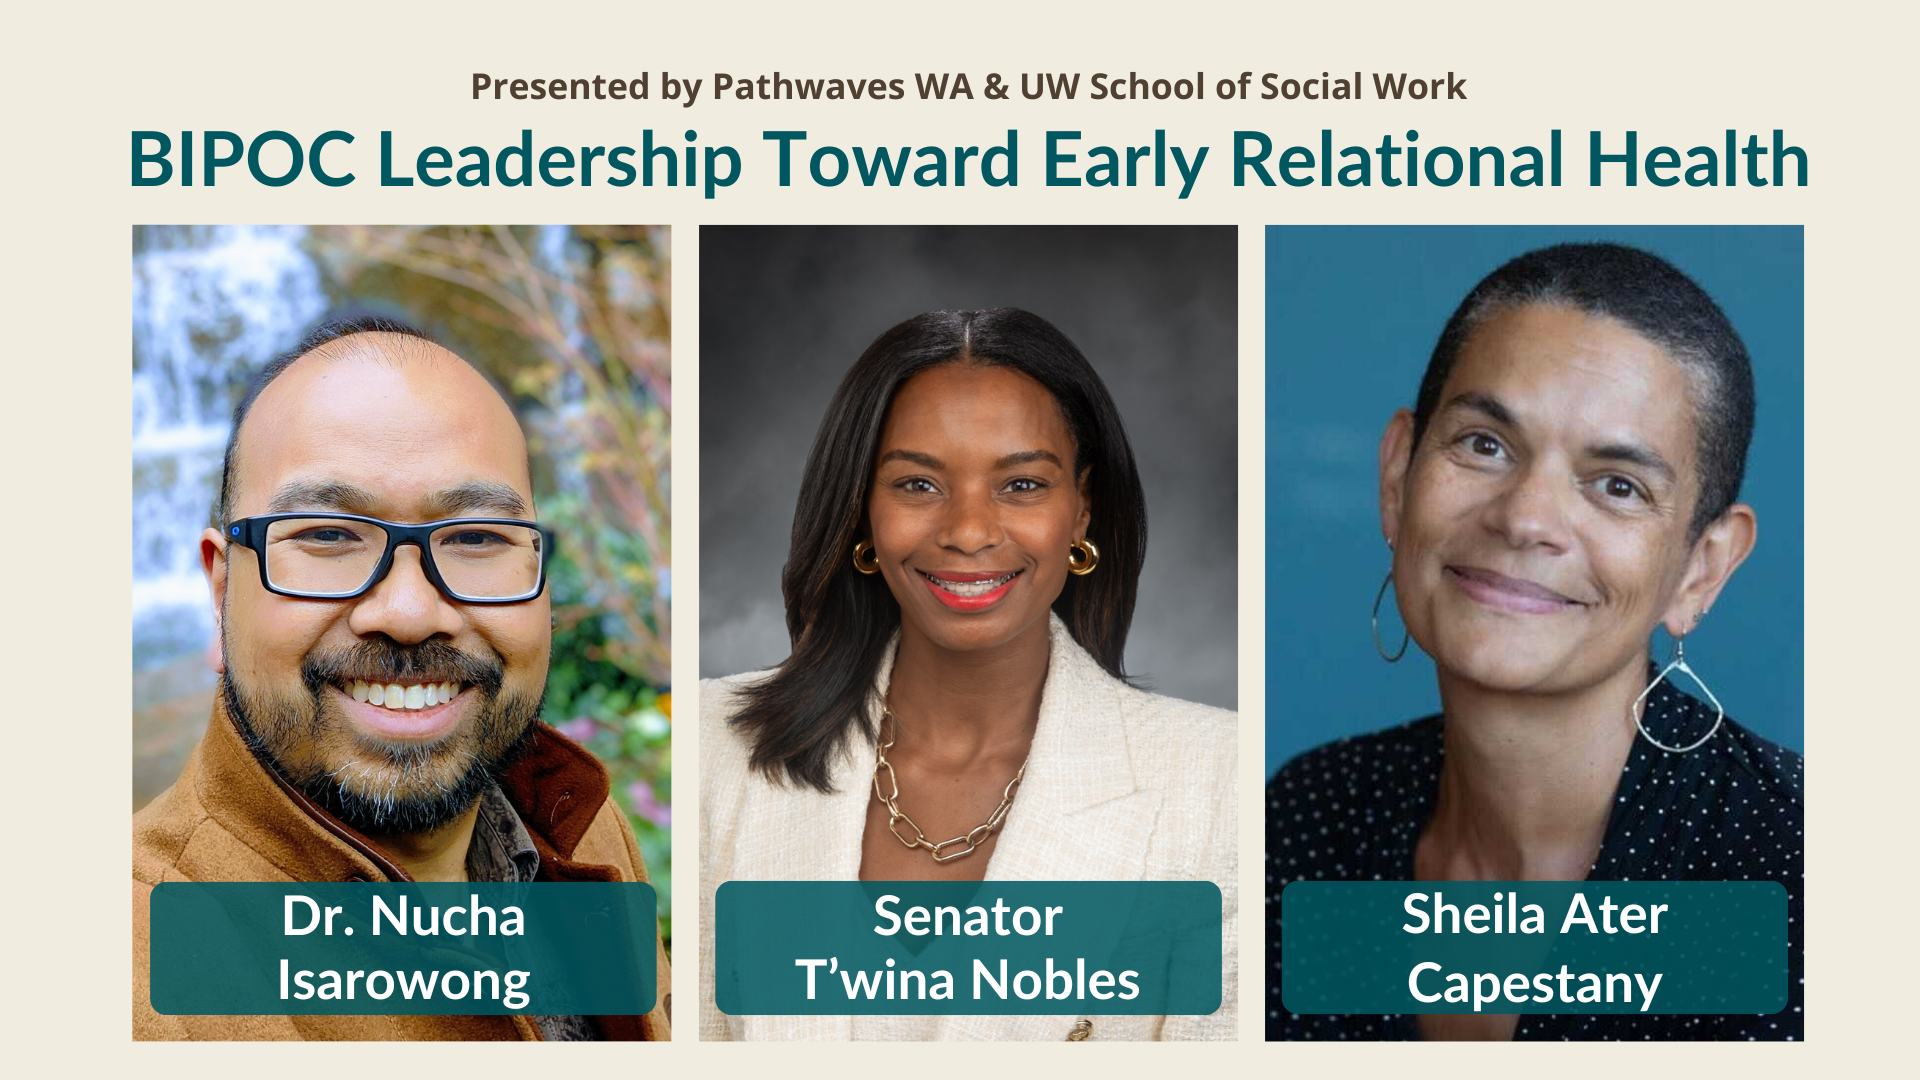 Text at the top reads: Presented by Pathwaves WA & UW School of Social Work. BIPOC Leadership Toward Early Relational Health. Photos of Dr. Nucha Isarowong, Senator T'wina Nobles, and Sheila Ater Capestany are below. Dr. Isarowong is smiling, wearing glasses with a tan jacket on. He is in front of a waterfall and foliage. Sen Nobles is in a white suit jacket and gold jewelry, smiling in front of a gray backdrop. Sheila Ater Capestany is smiling in front of a blue backdrop wearing a polka dot top and silver dangling earrings.